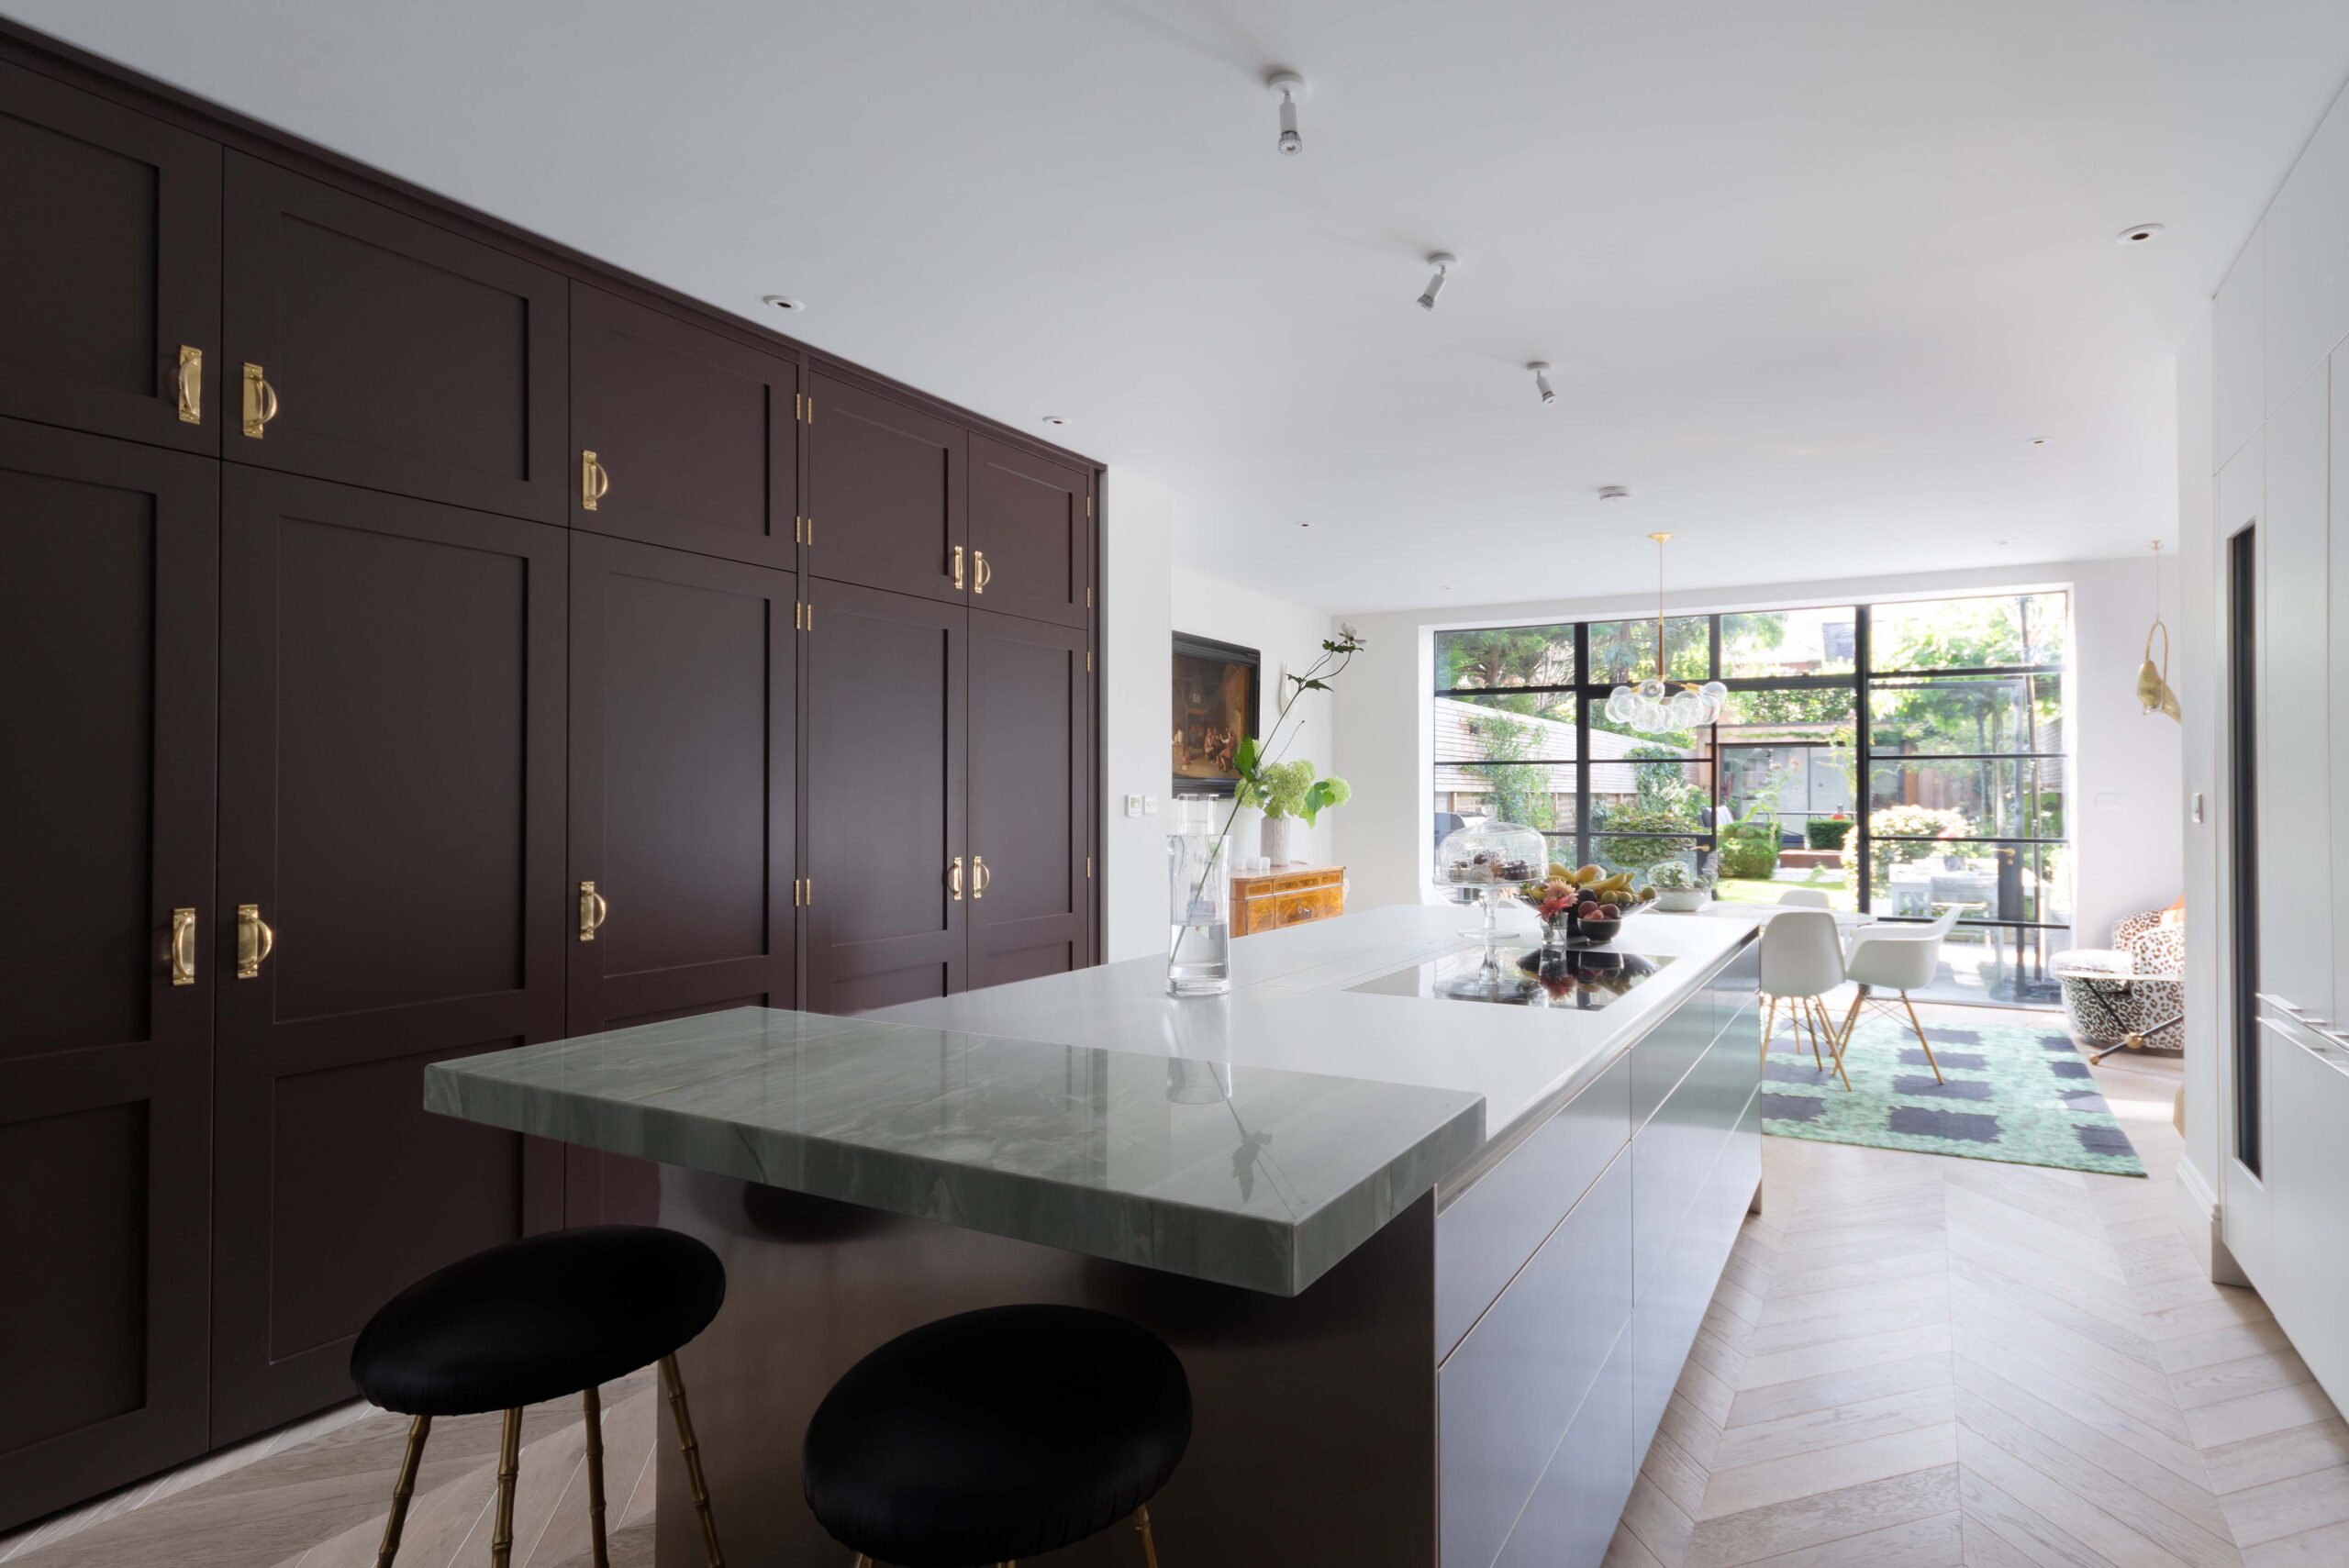 Hammersmith Grove contemporary kitchen with full-height storage and central island